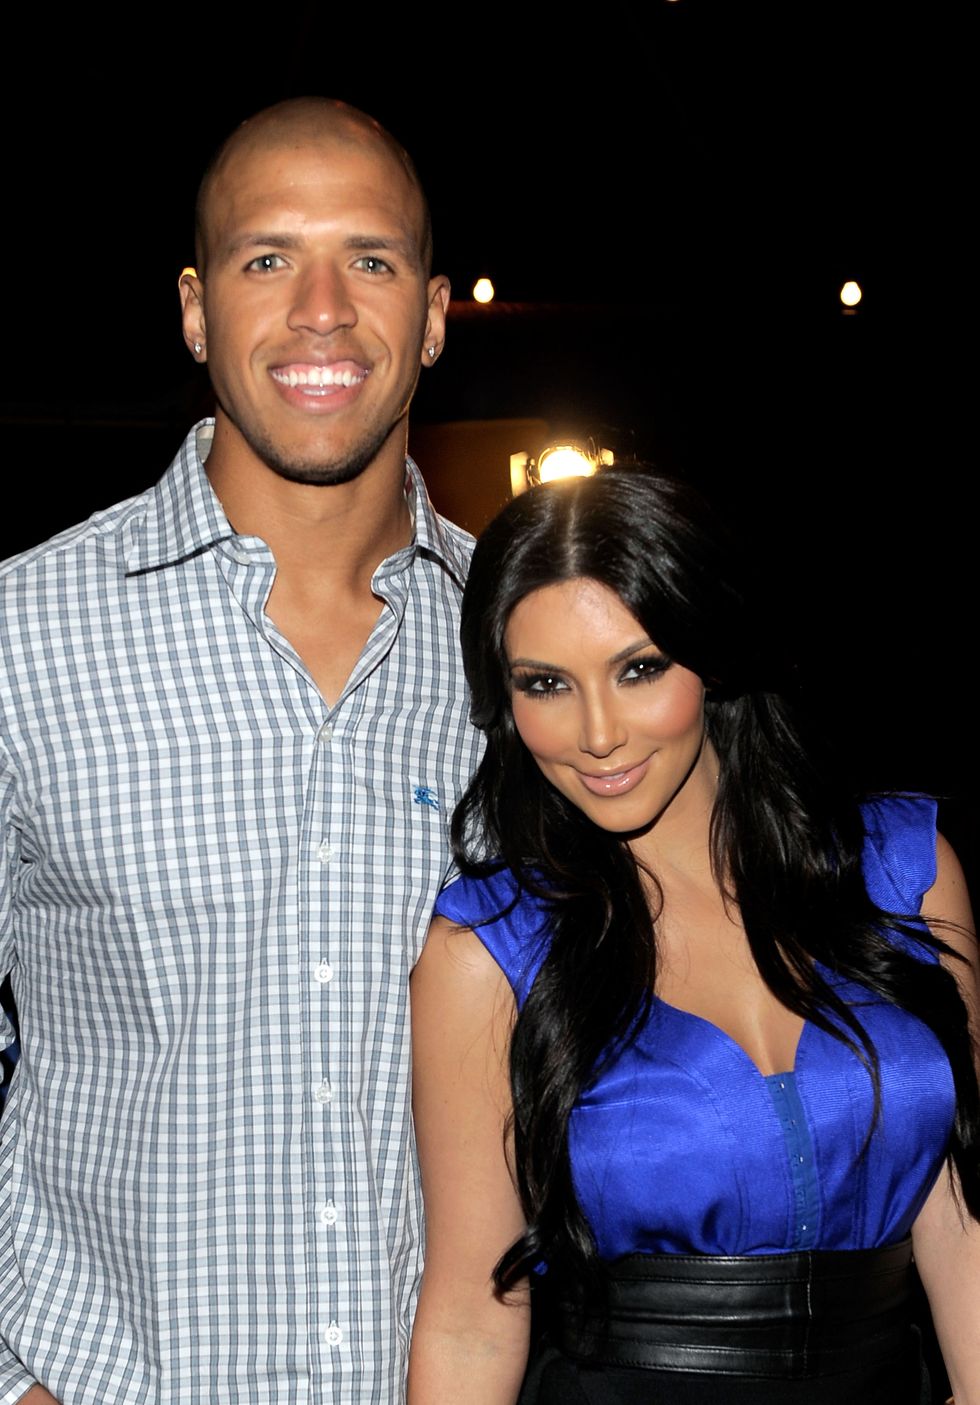 bel air, ca july 12 dallas cowboys football player miles austin and actress kim kardashian attend professional tennis player serena williams pre espys house party held at a private residence on july 12, 2010 in bel air, california photo by charley gallaygetty images for sw